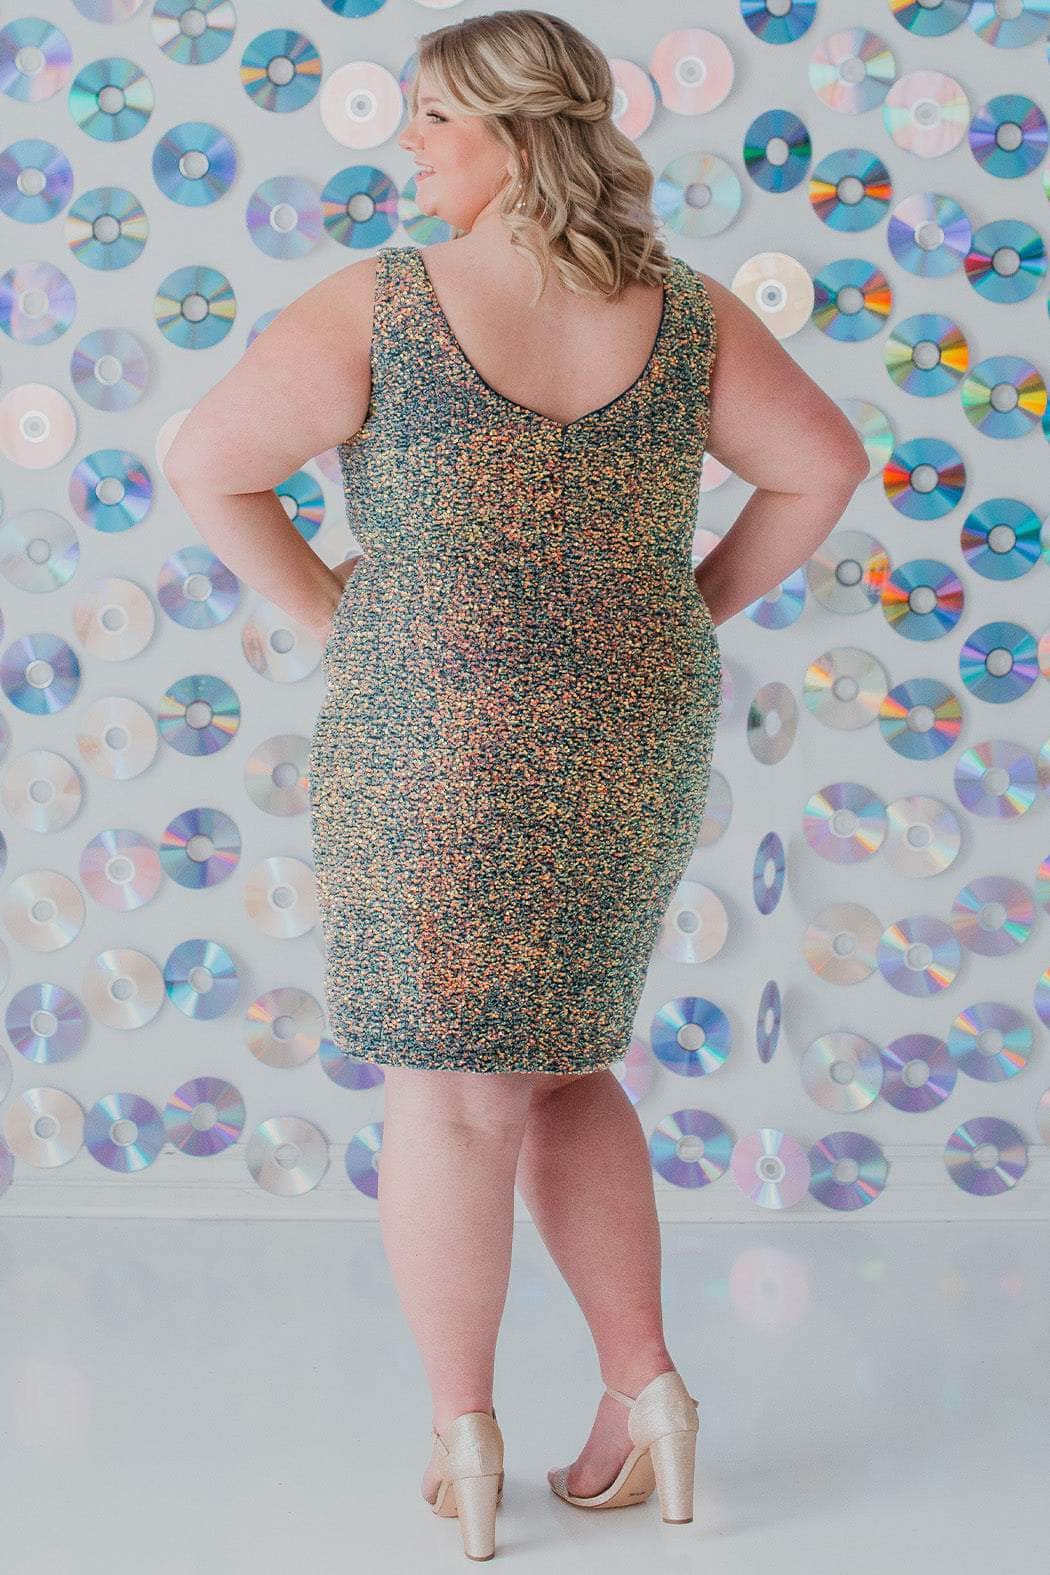 Sydney's Closet SC8110 - Multi-Colored Sequin Sleeveless Cocktail Dress Special Occasion Dress